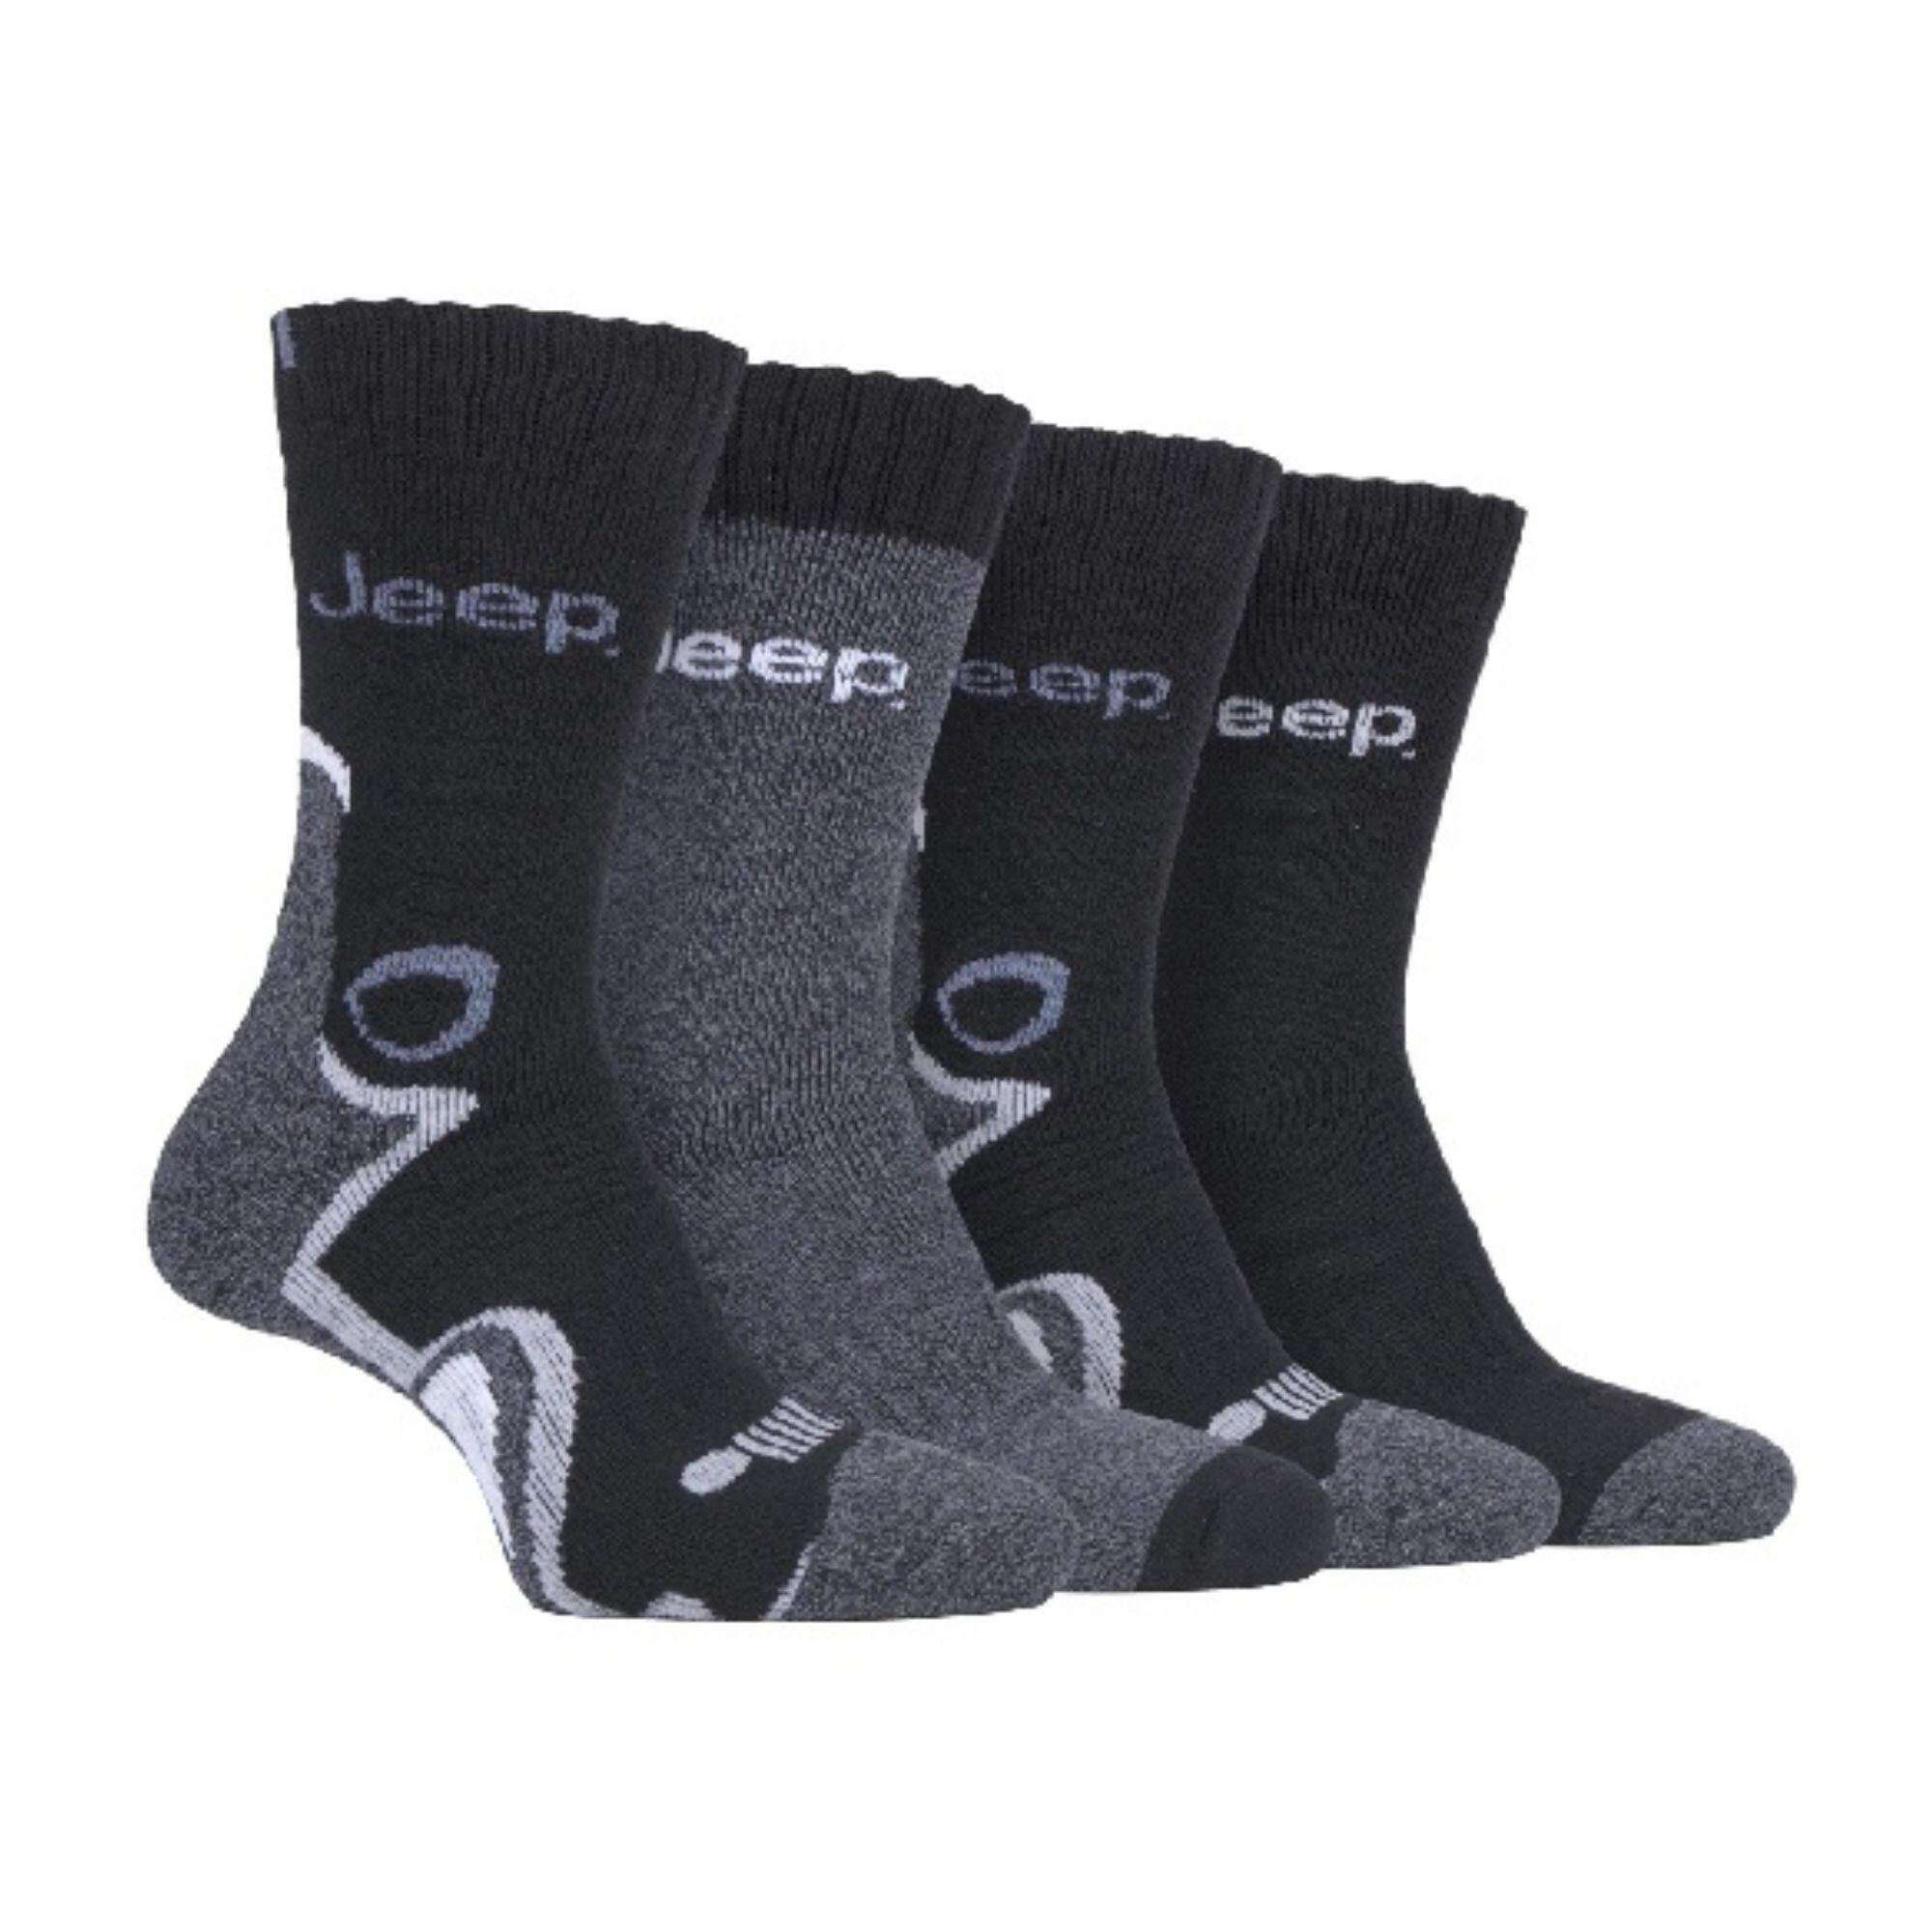 JEEP 4 Pairs Mens Anti Blister Thick Cushioned Luxury Boot Socks for Hiking